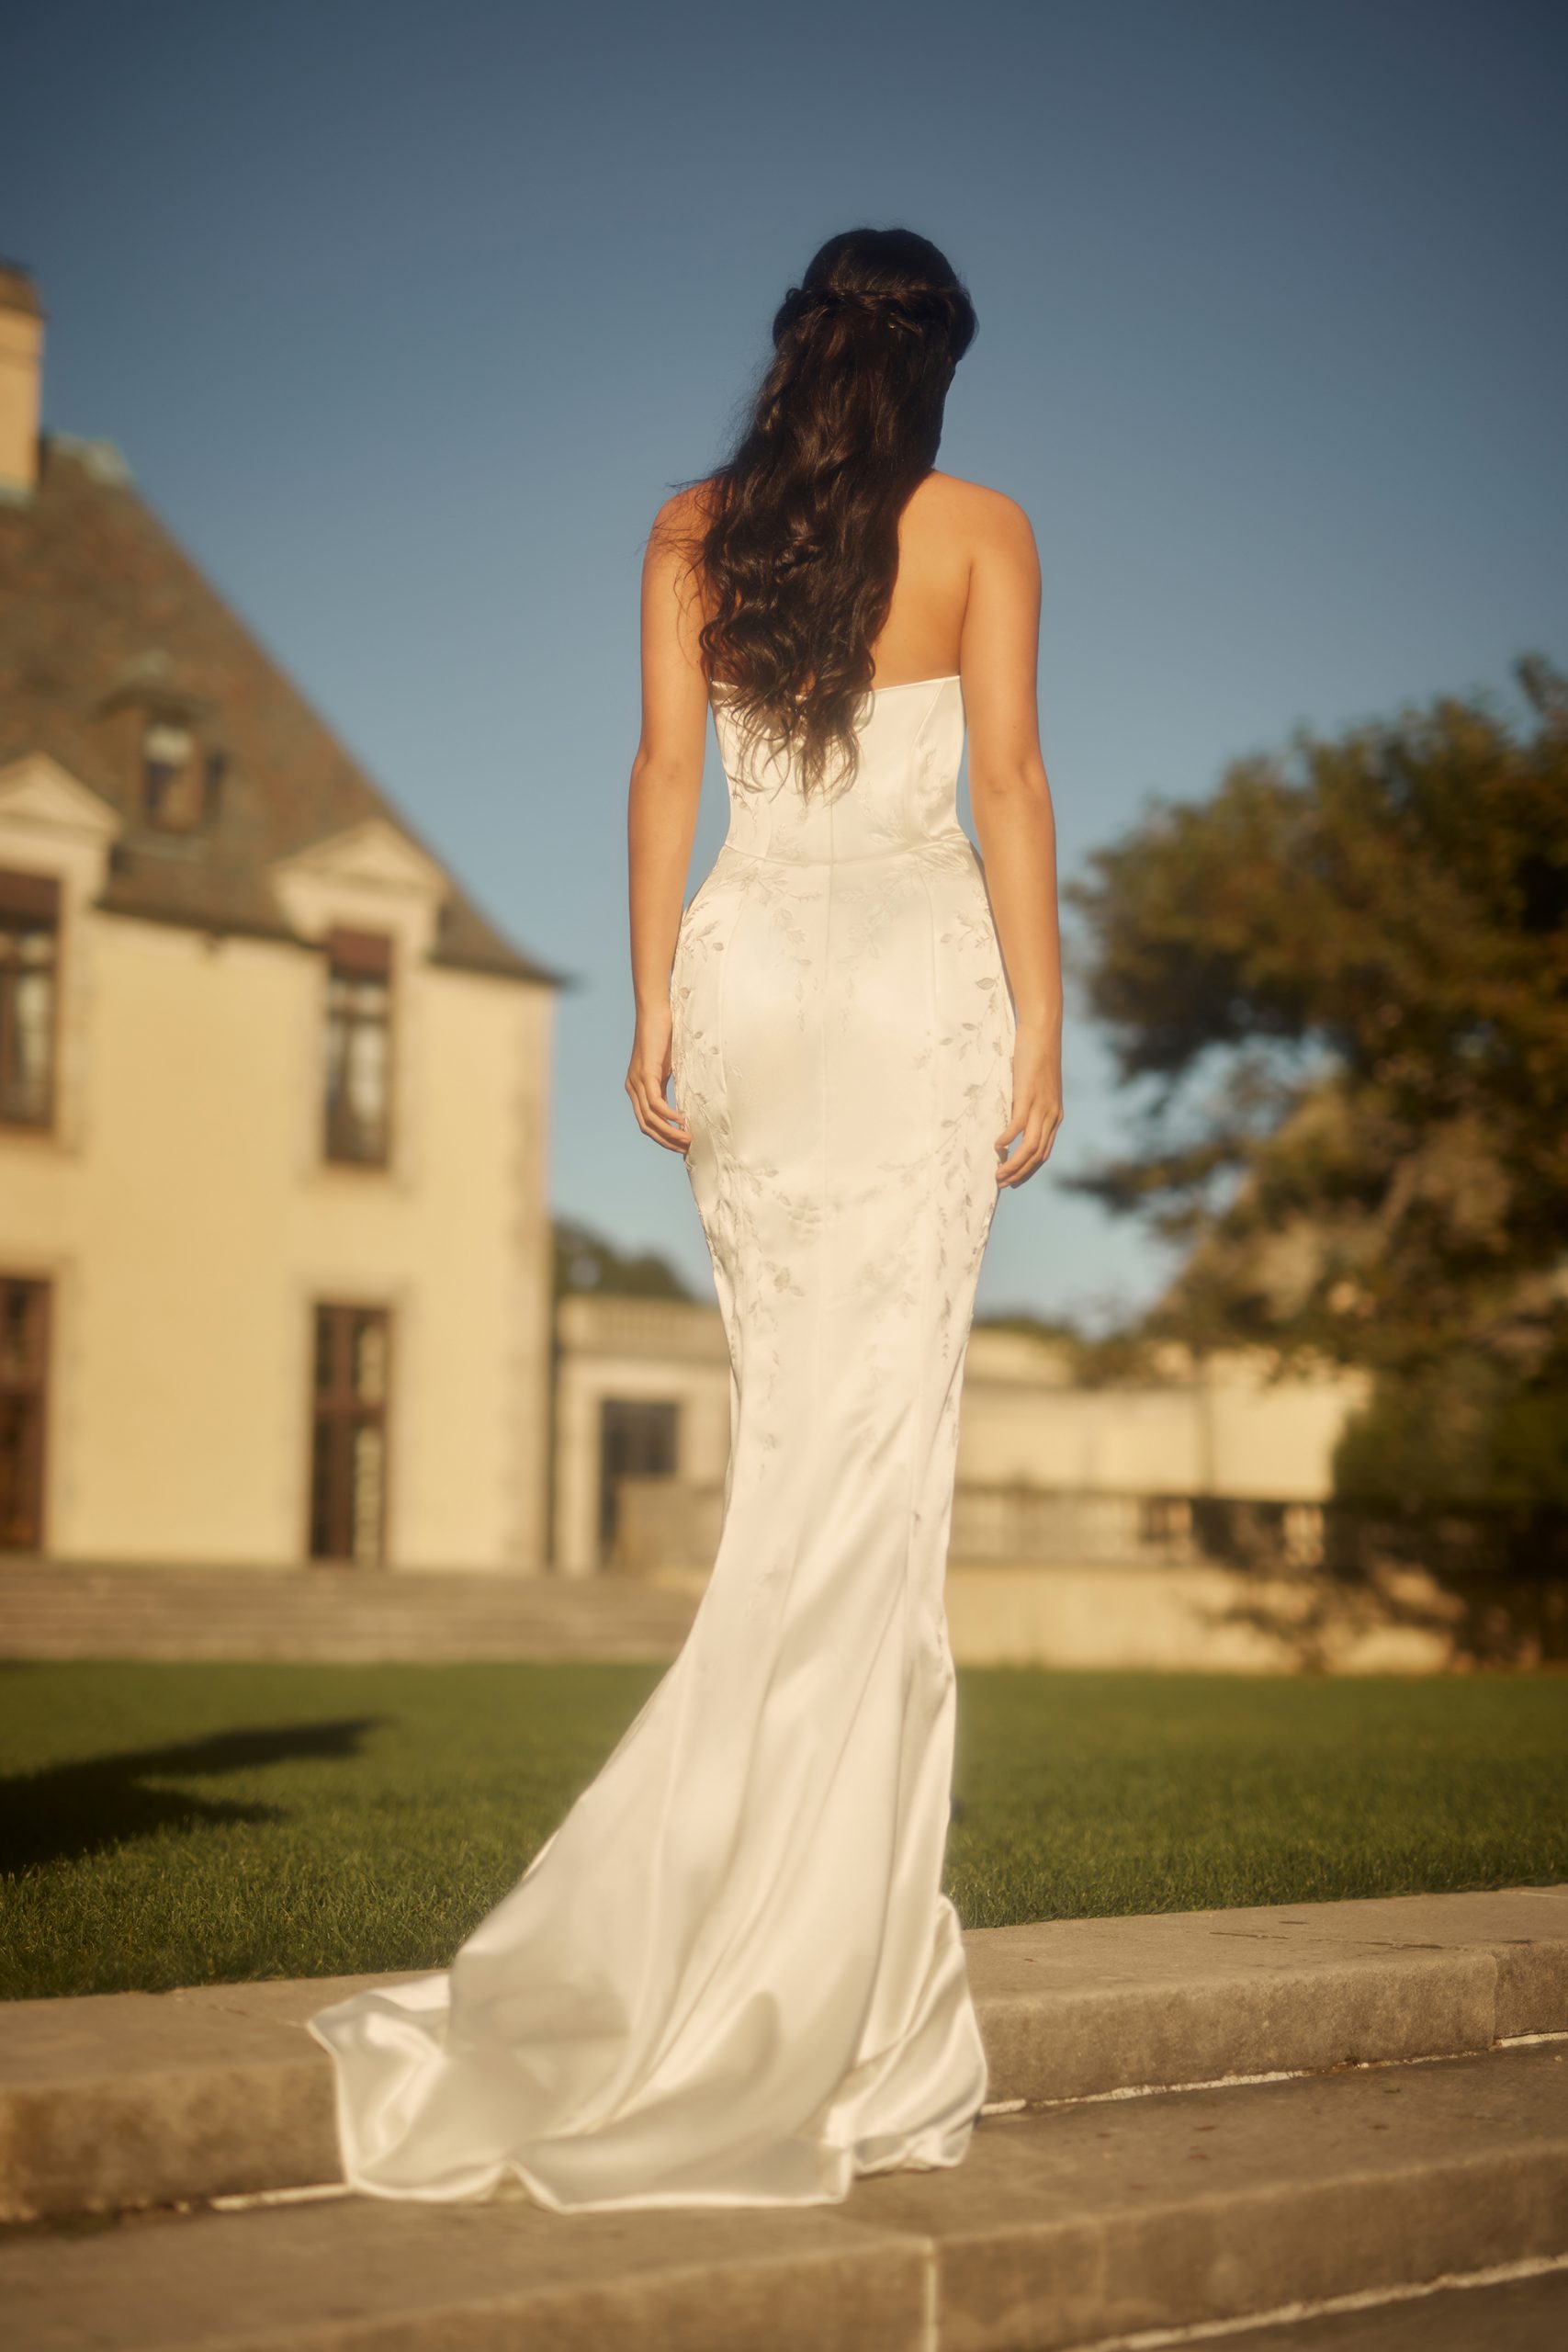 Embroidered Satin Sheath Gown With Detachable Overskirt by Enaura Bridal - Image 3